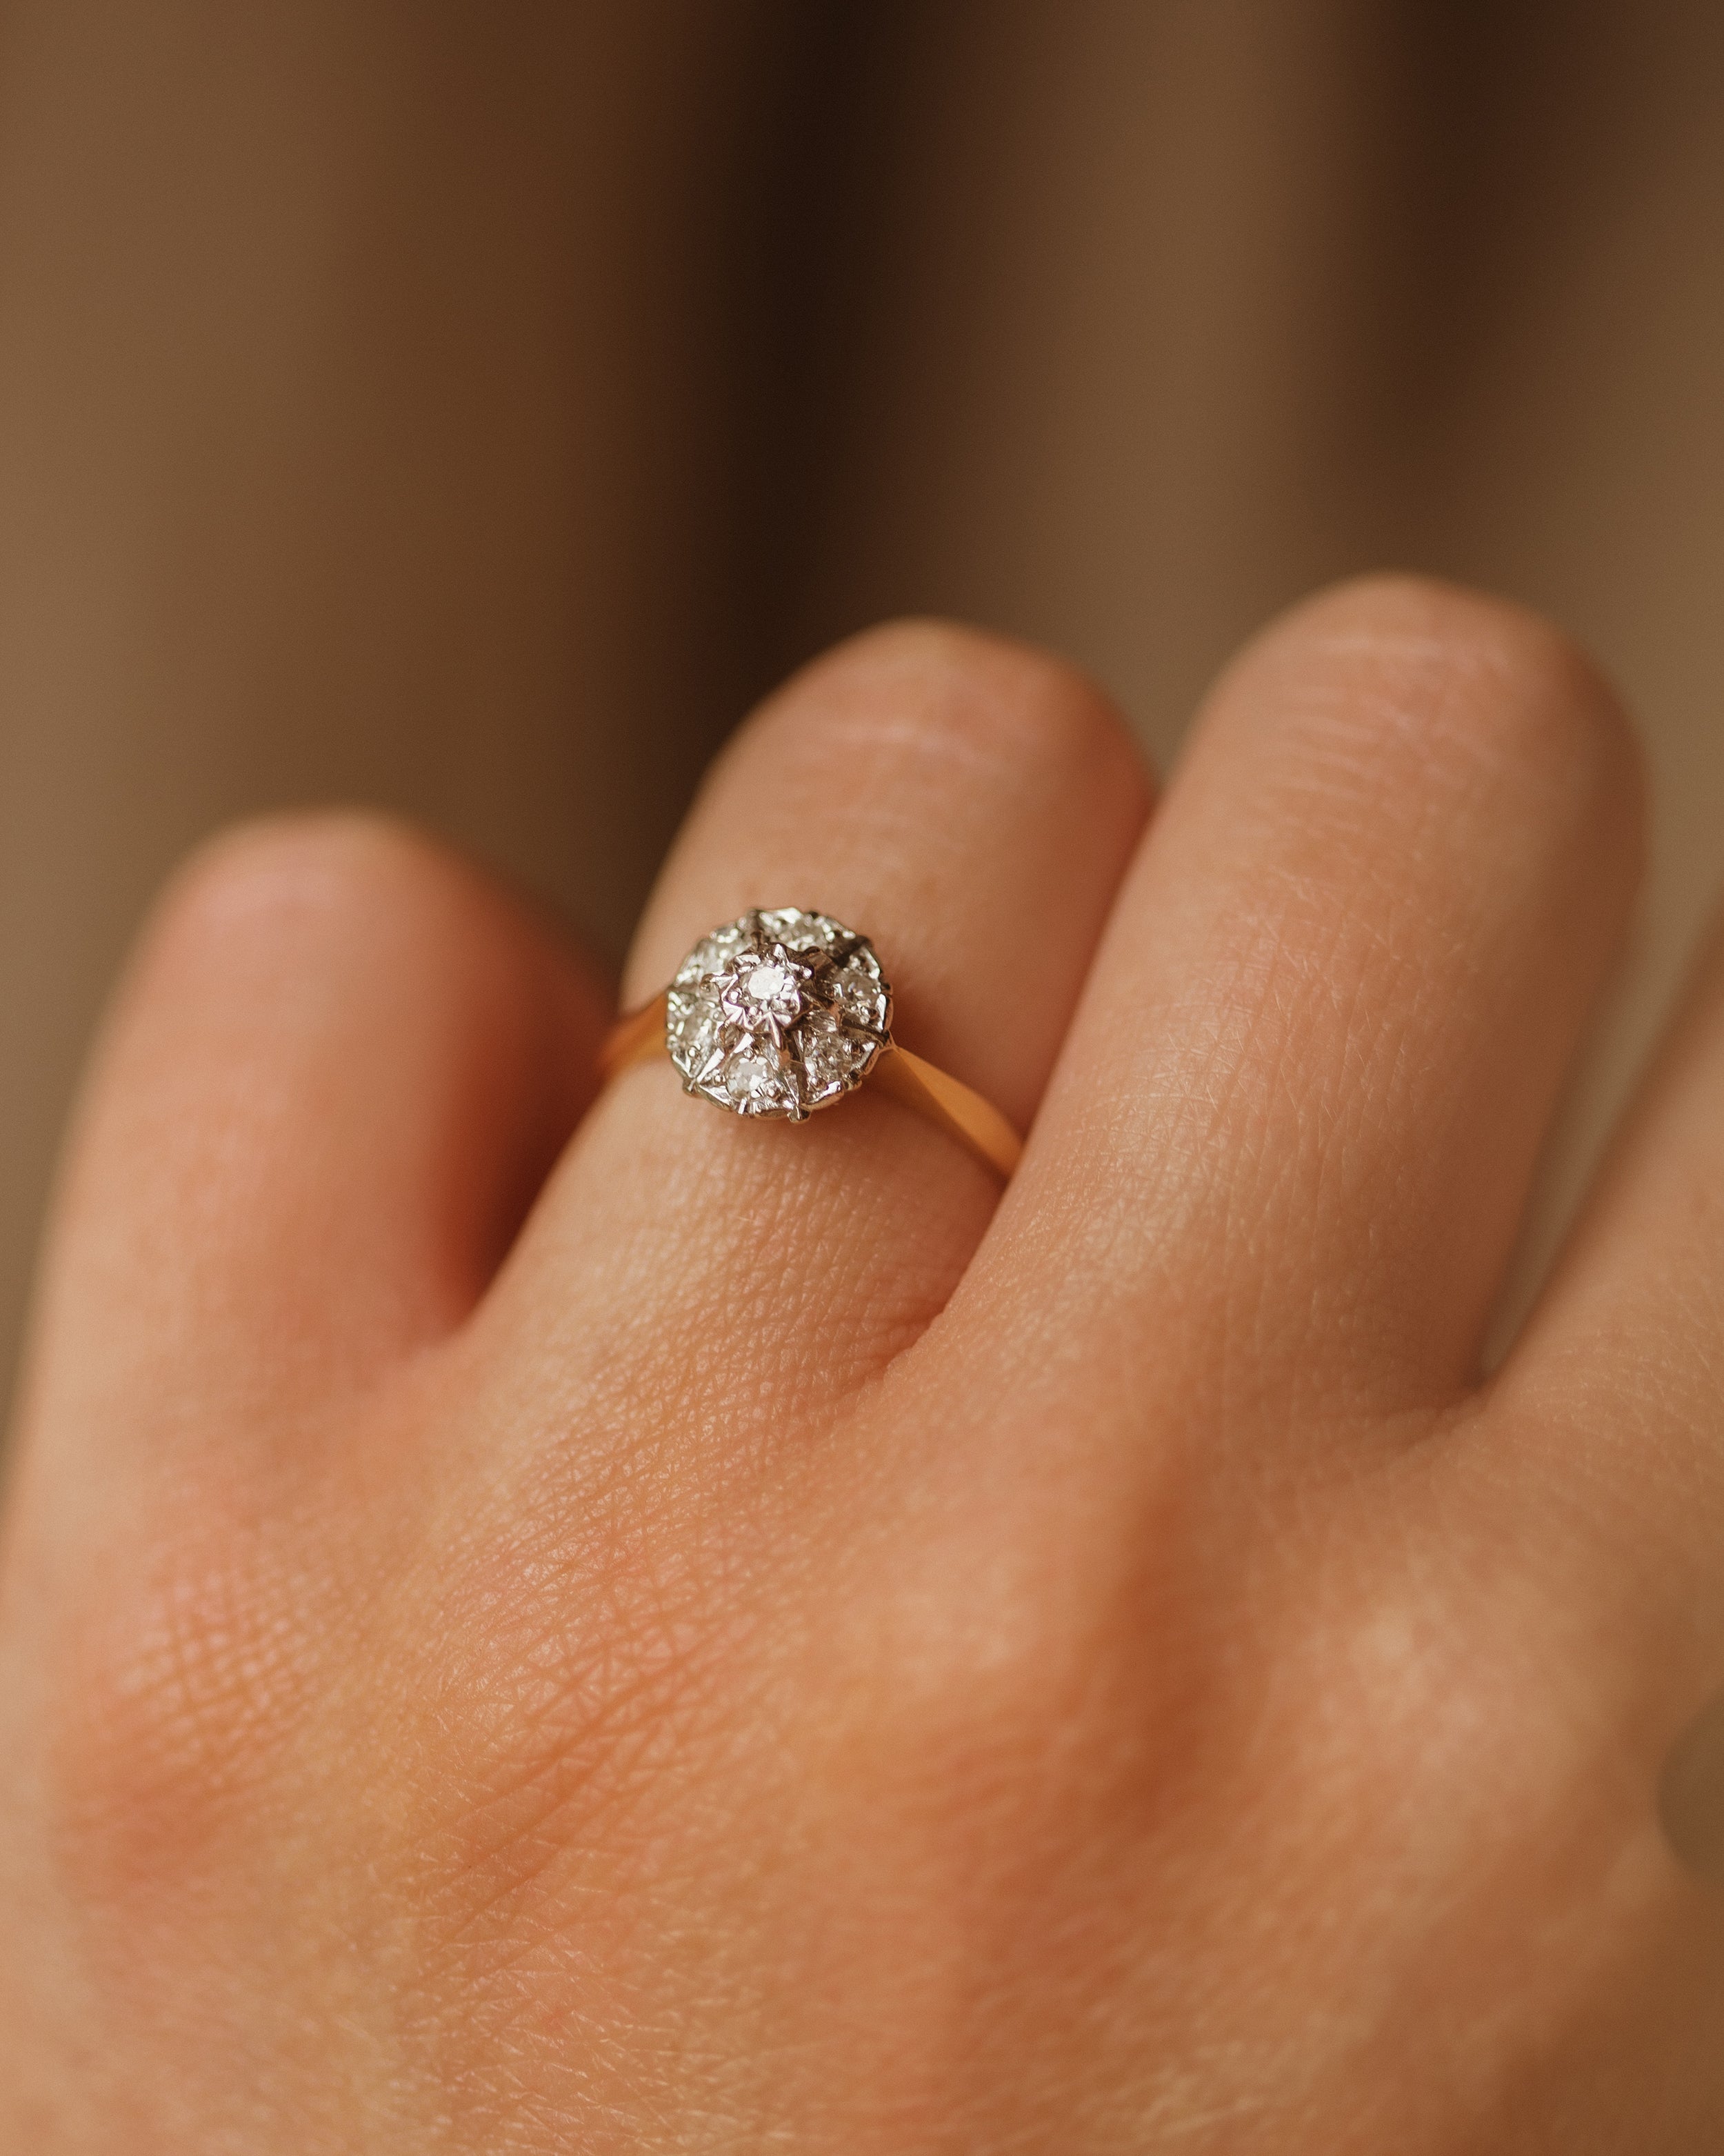 13 Unique Yellow Diamond Engagement Rings - hitched.co.uk - hitched.co.uk